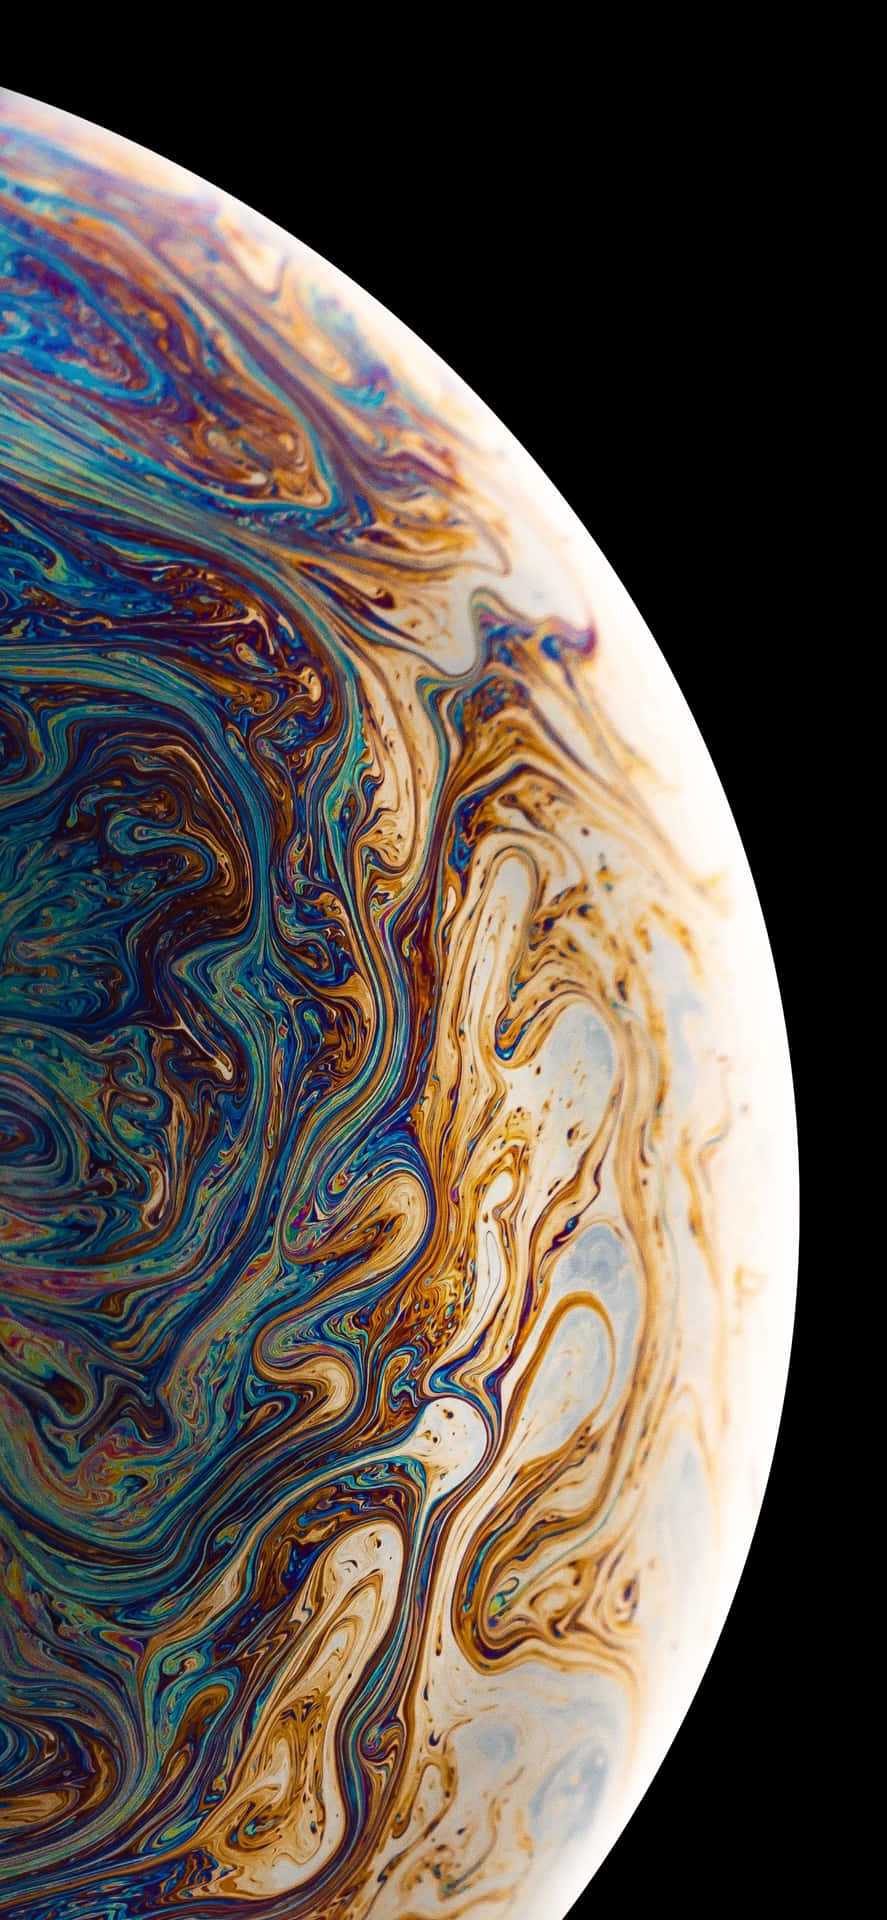 A Close Up Of A Colorful Swirled Object